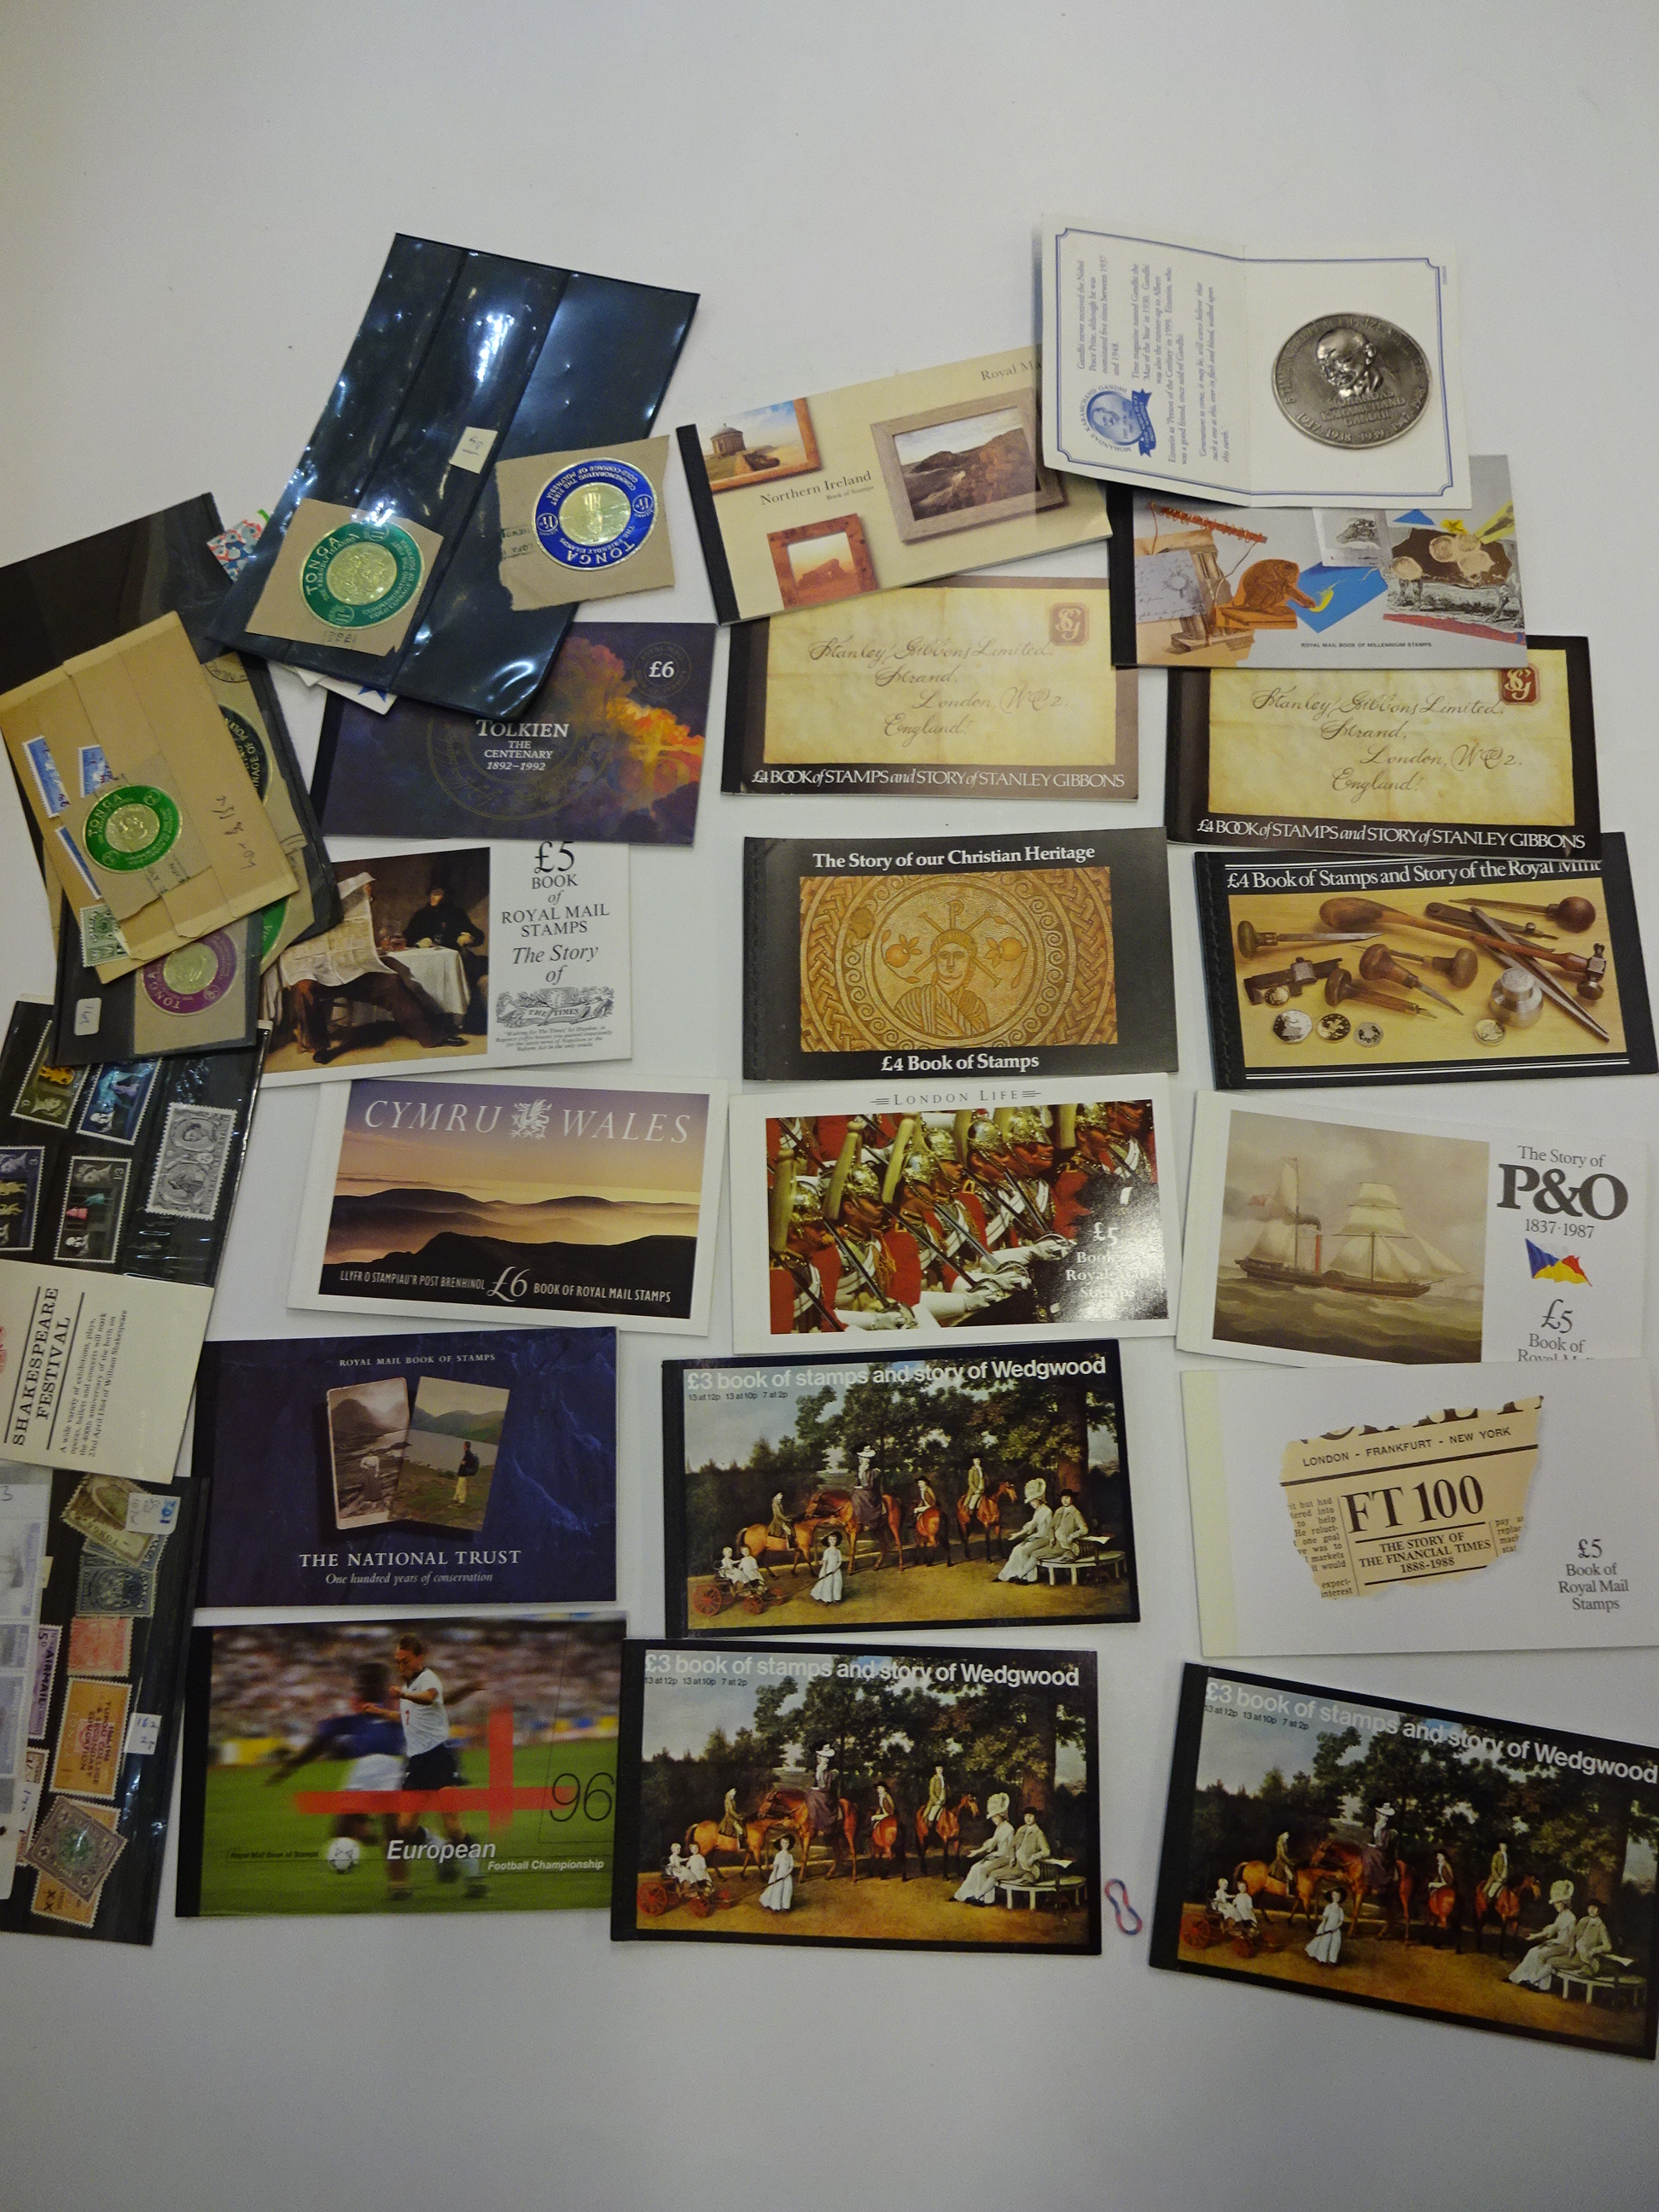 COLLECTION OF STAMPS COINS 1ST DAY COVERS INCLUDING MILITARY ROYALTY FIFA ETC. SOME UNCIRCULATED.